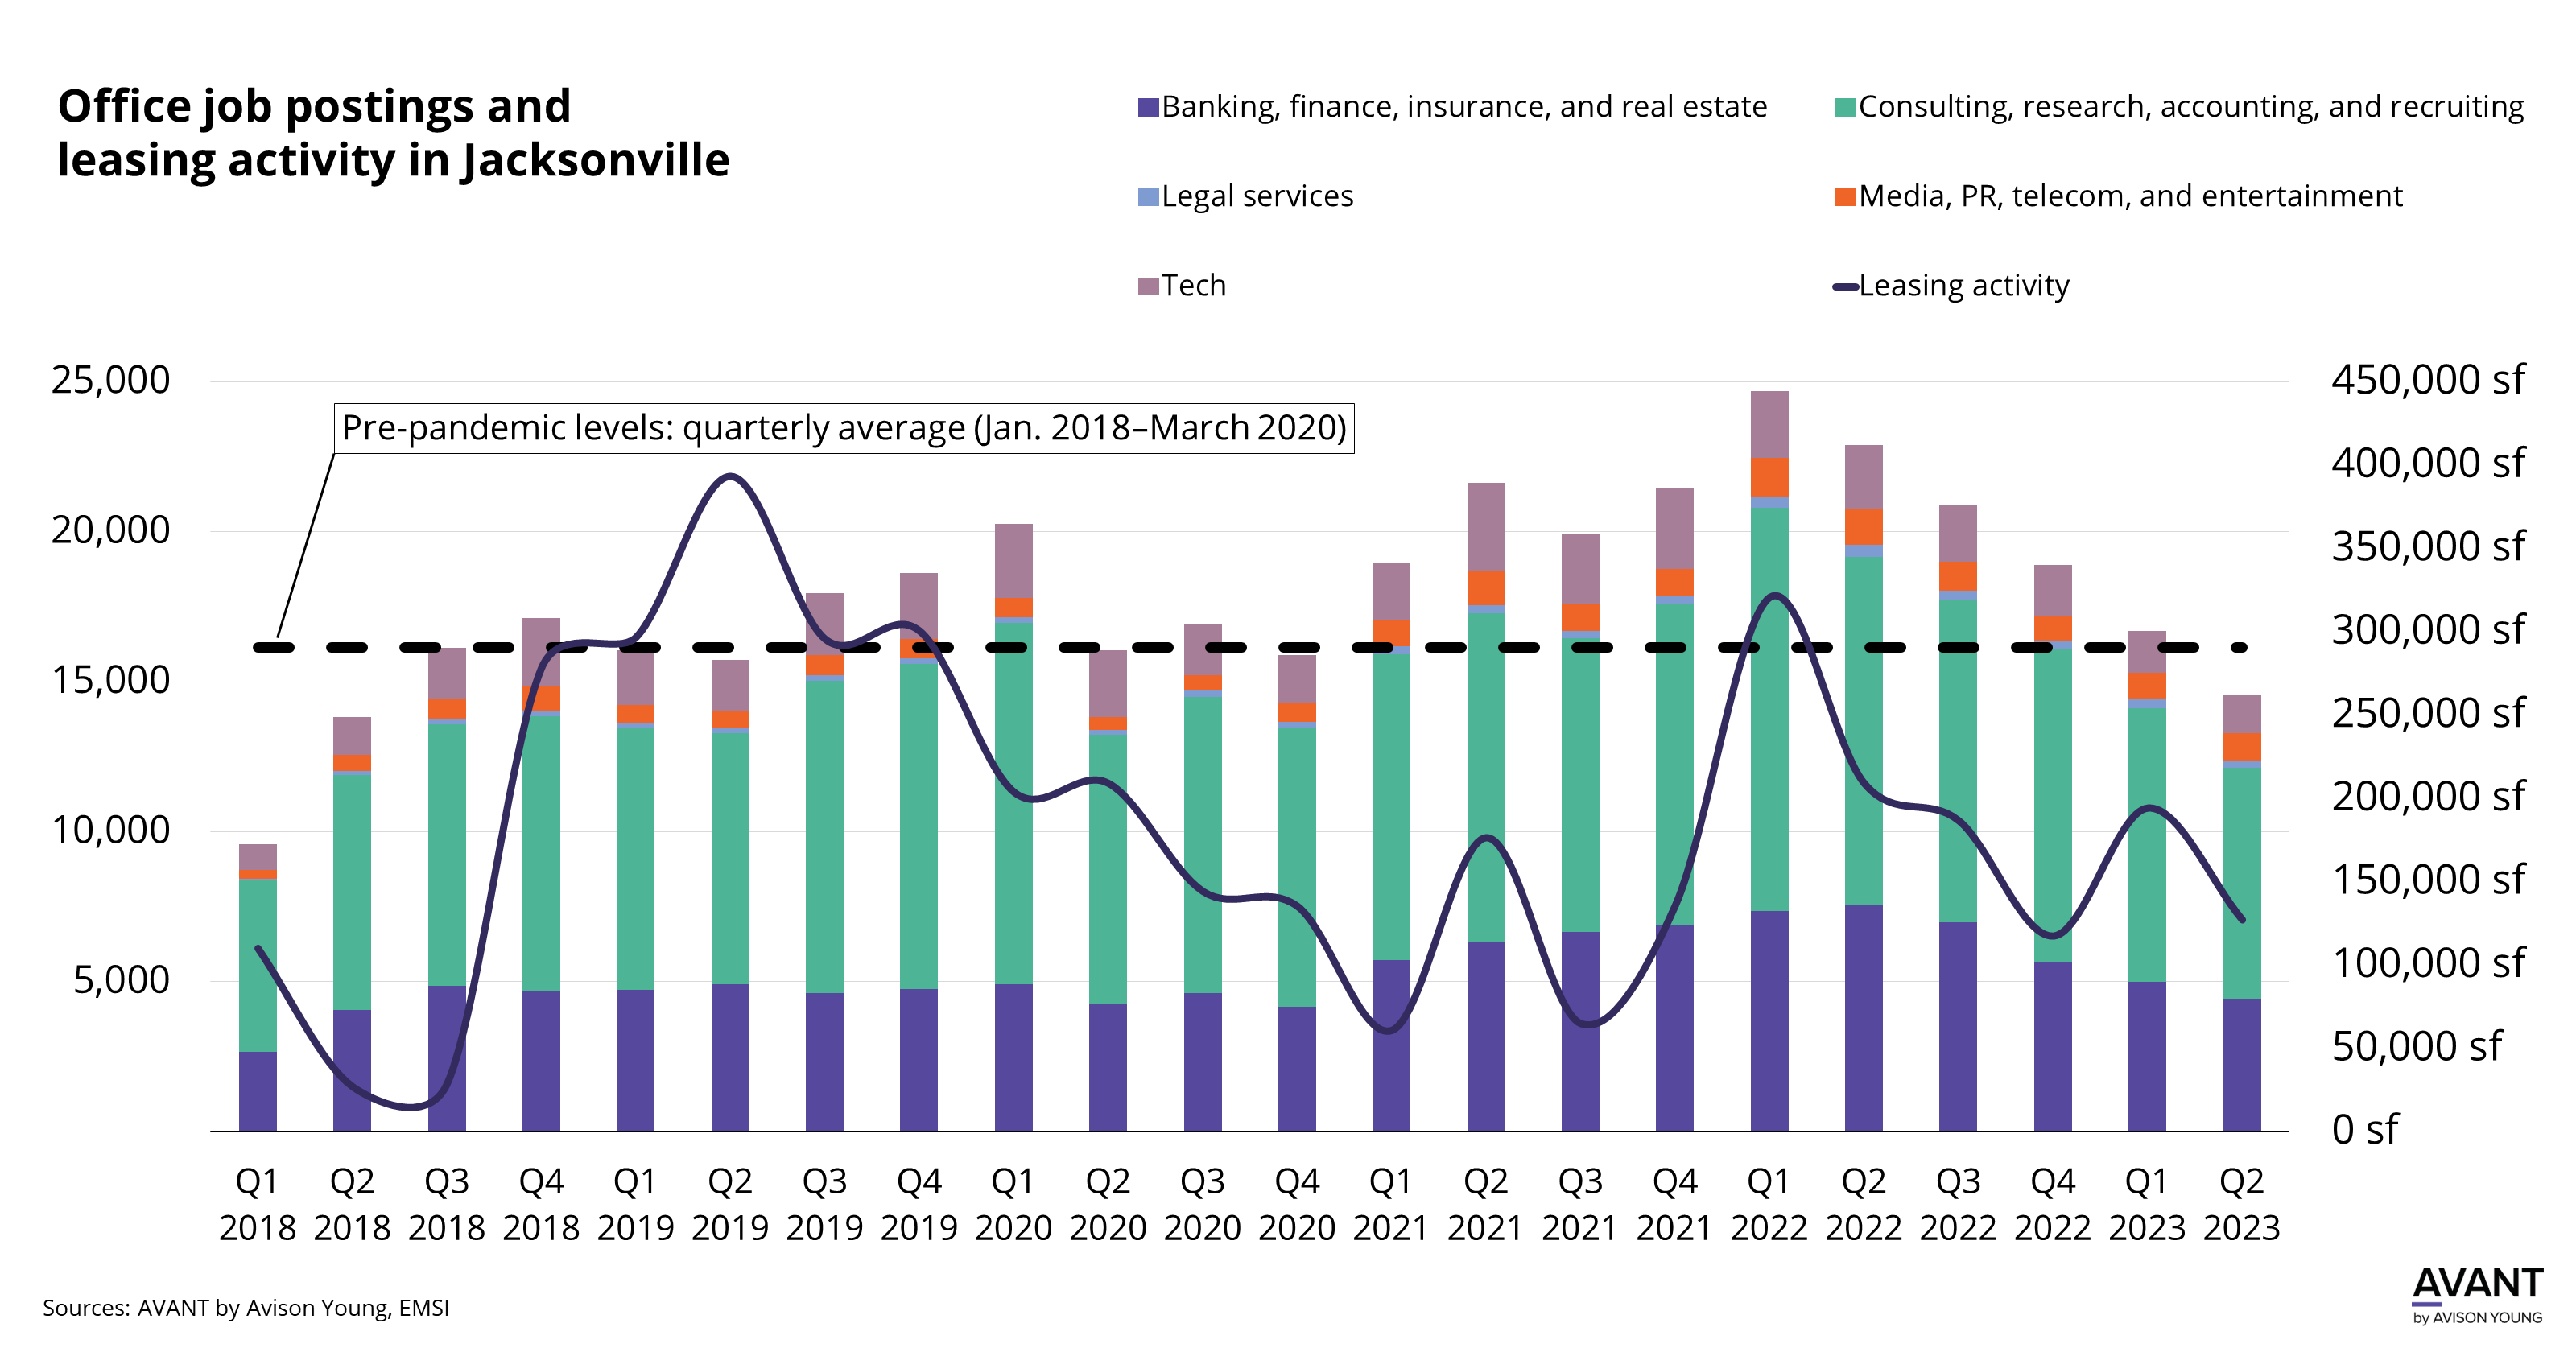 graph of office leasing activity and job postings by industry type in Jacksonville from Q1 2018 to Q2 2023